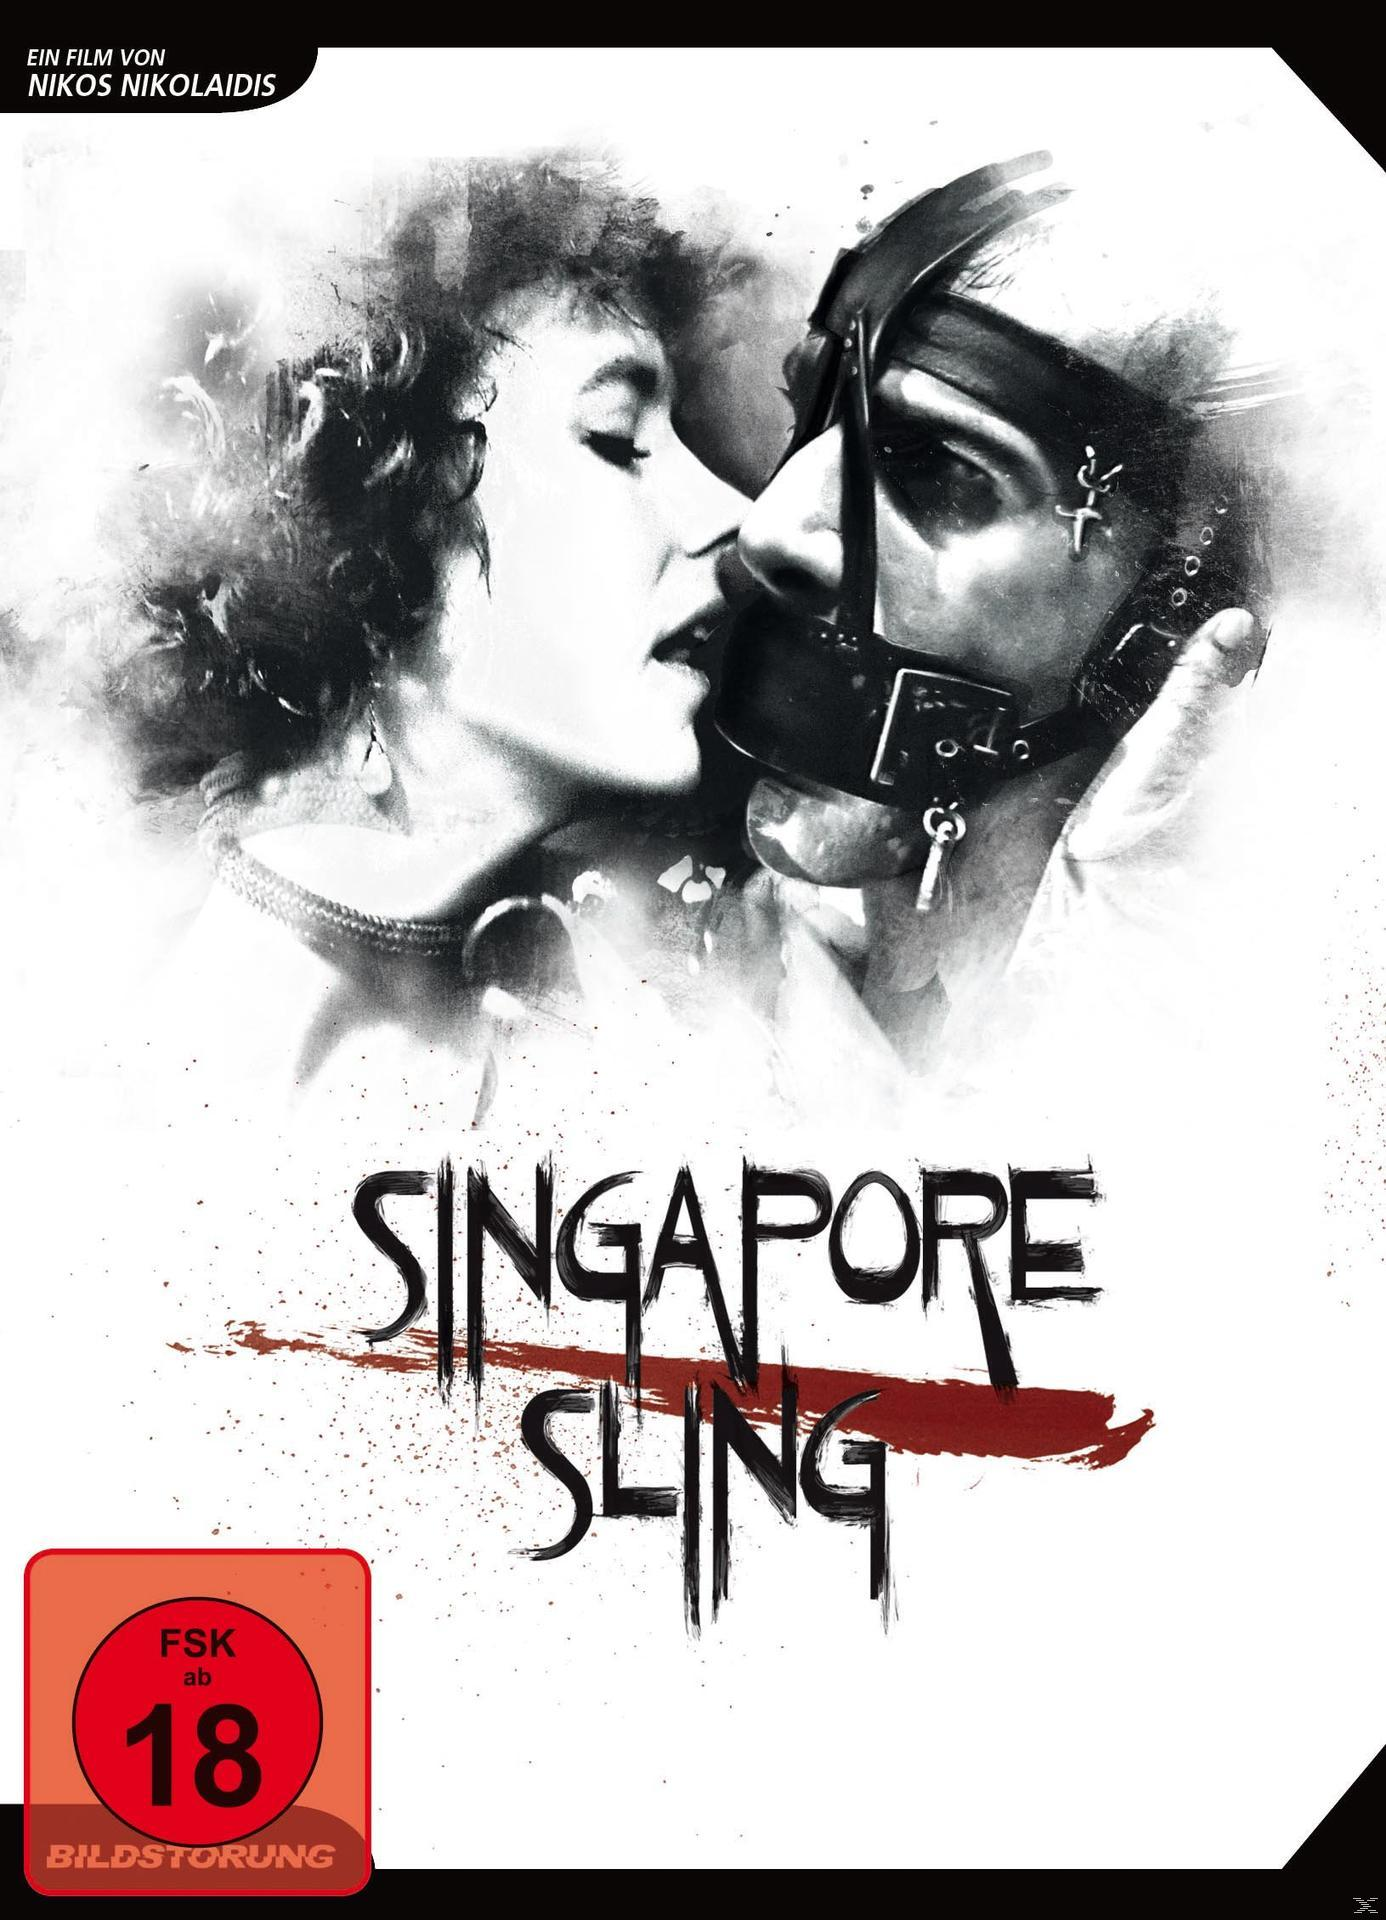 DVD Singapore Edition) (Special Sling